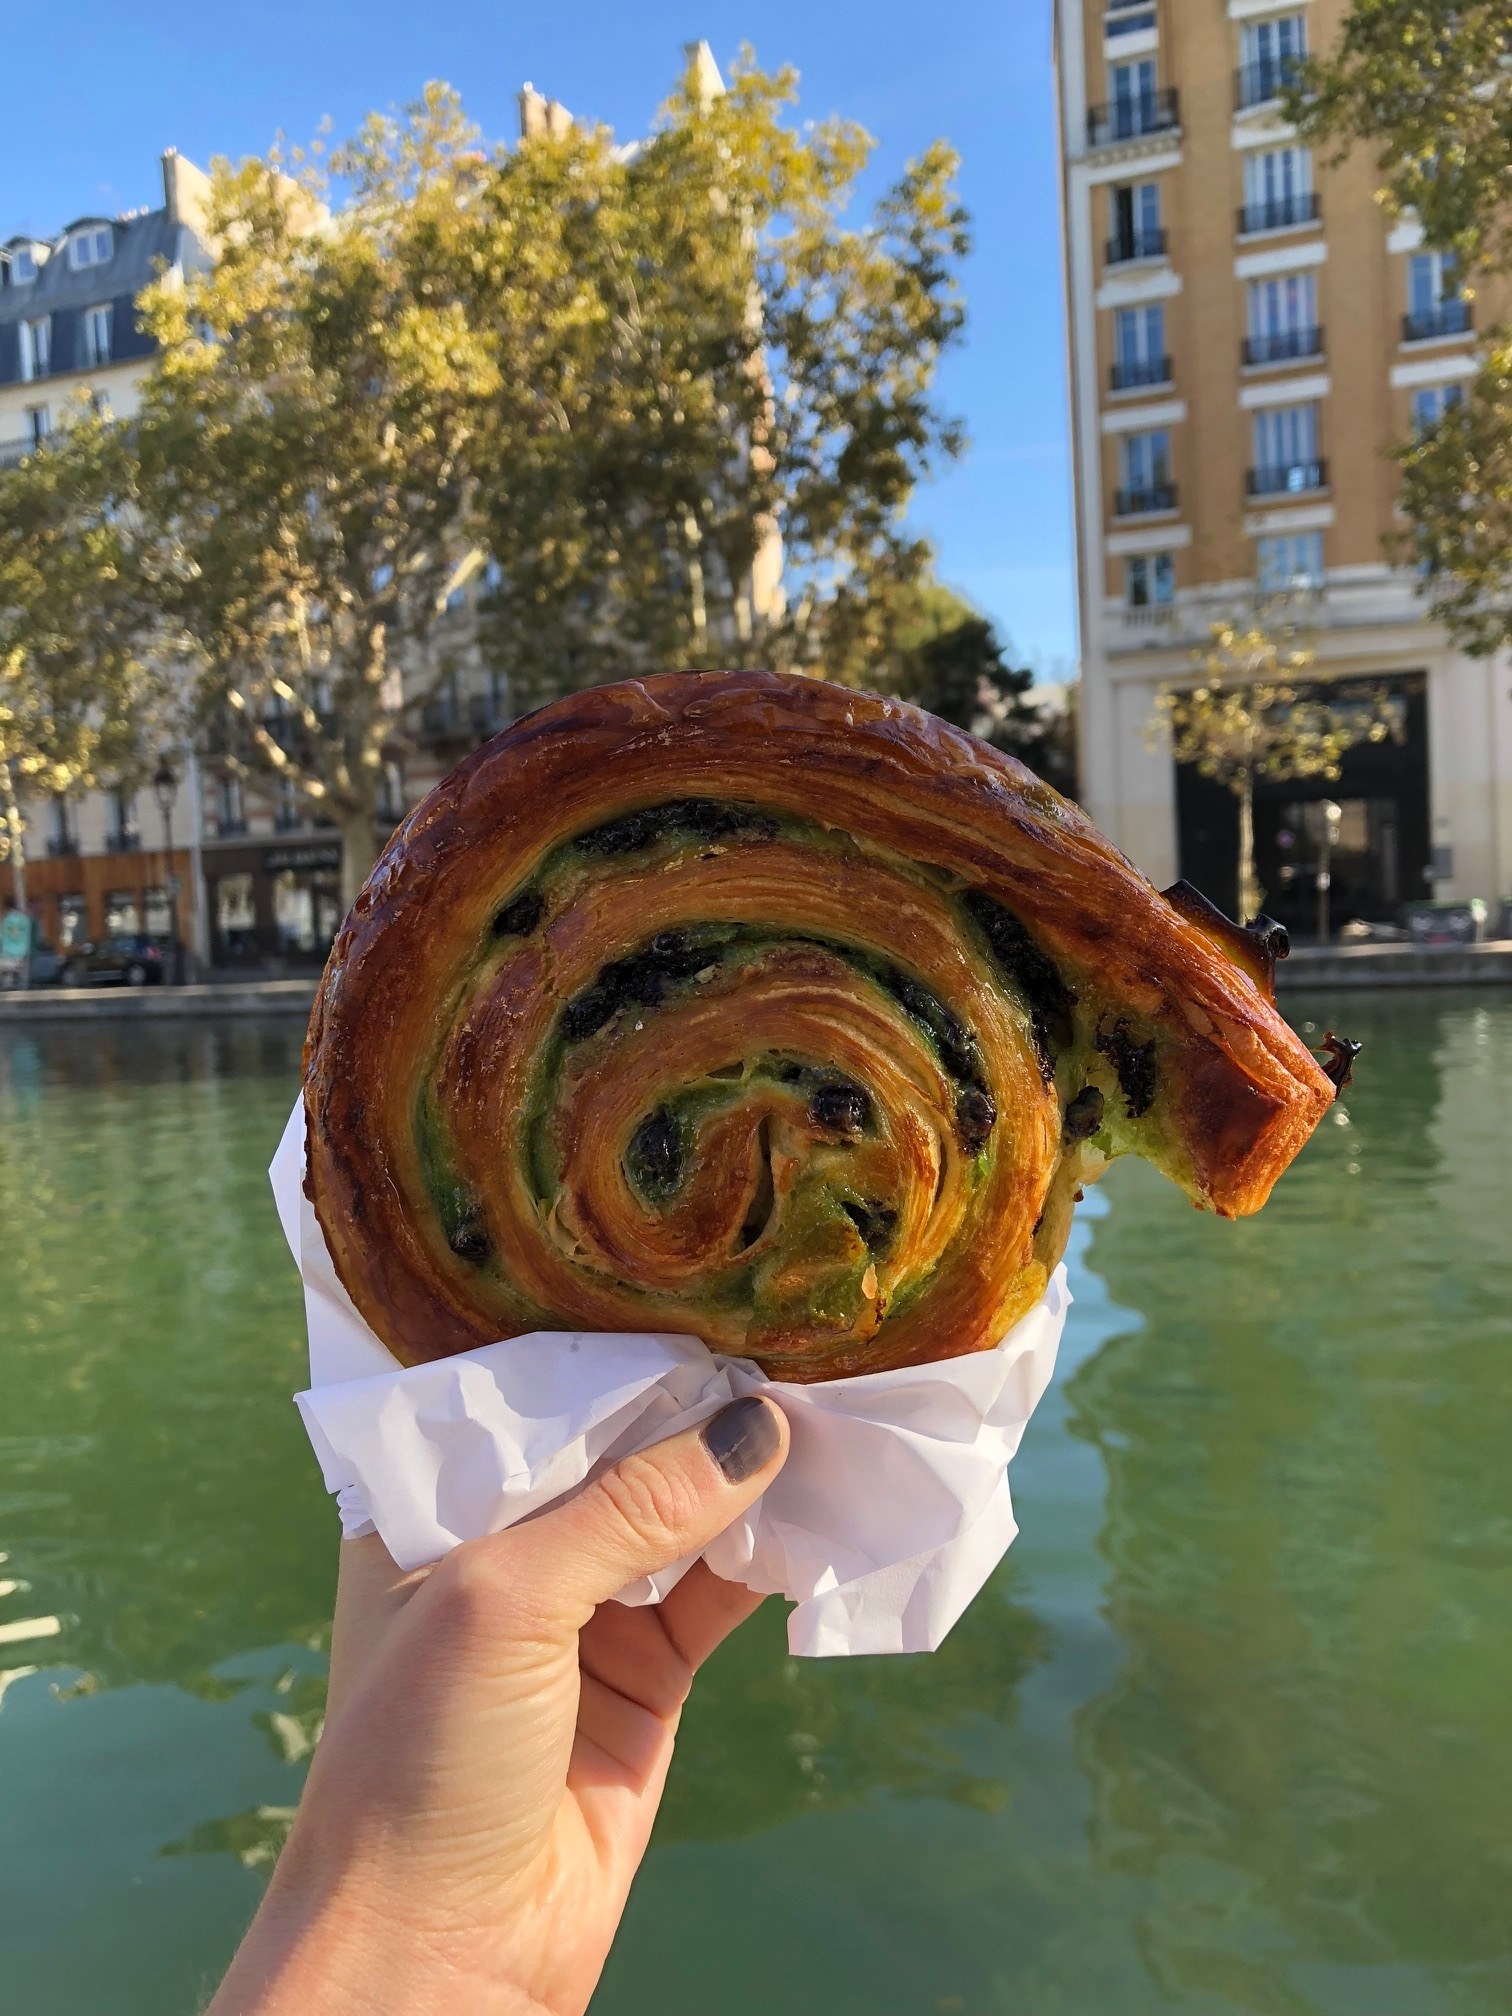 A pastry by the canal